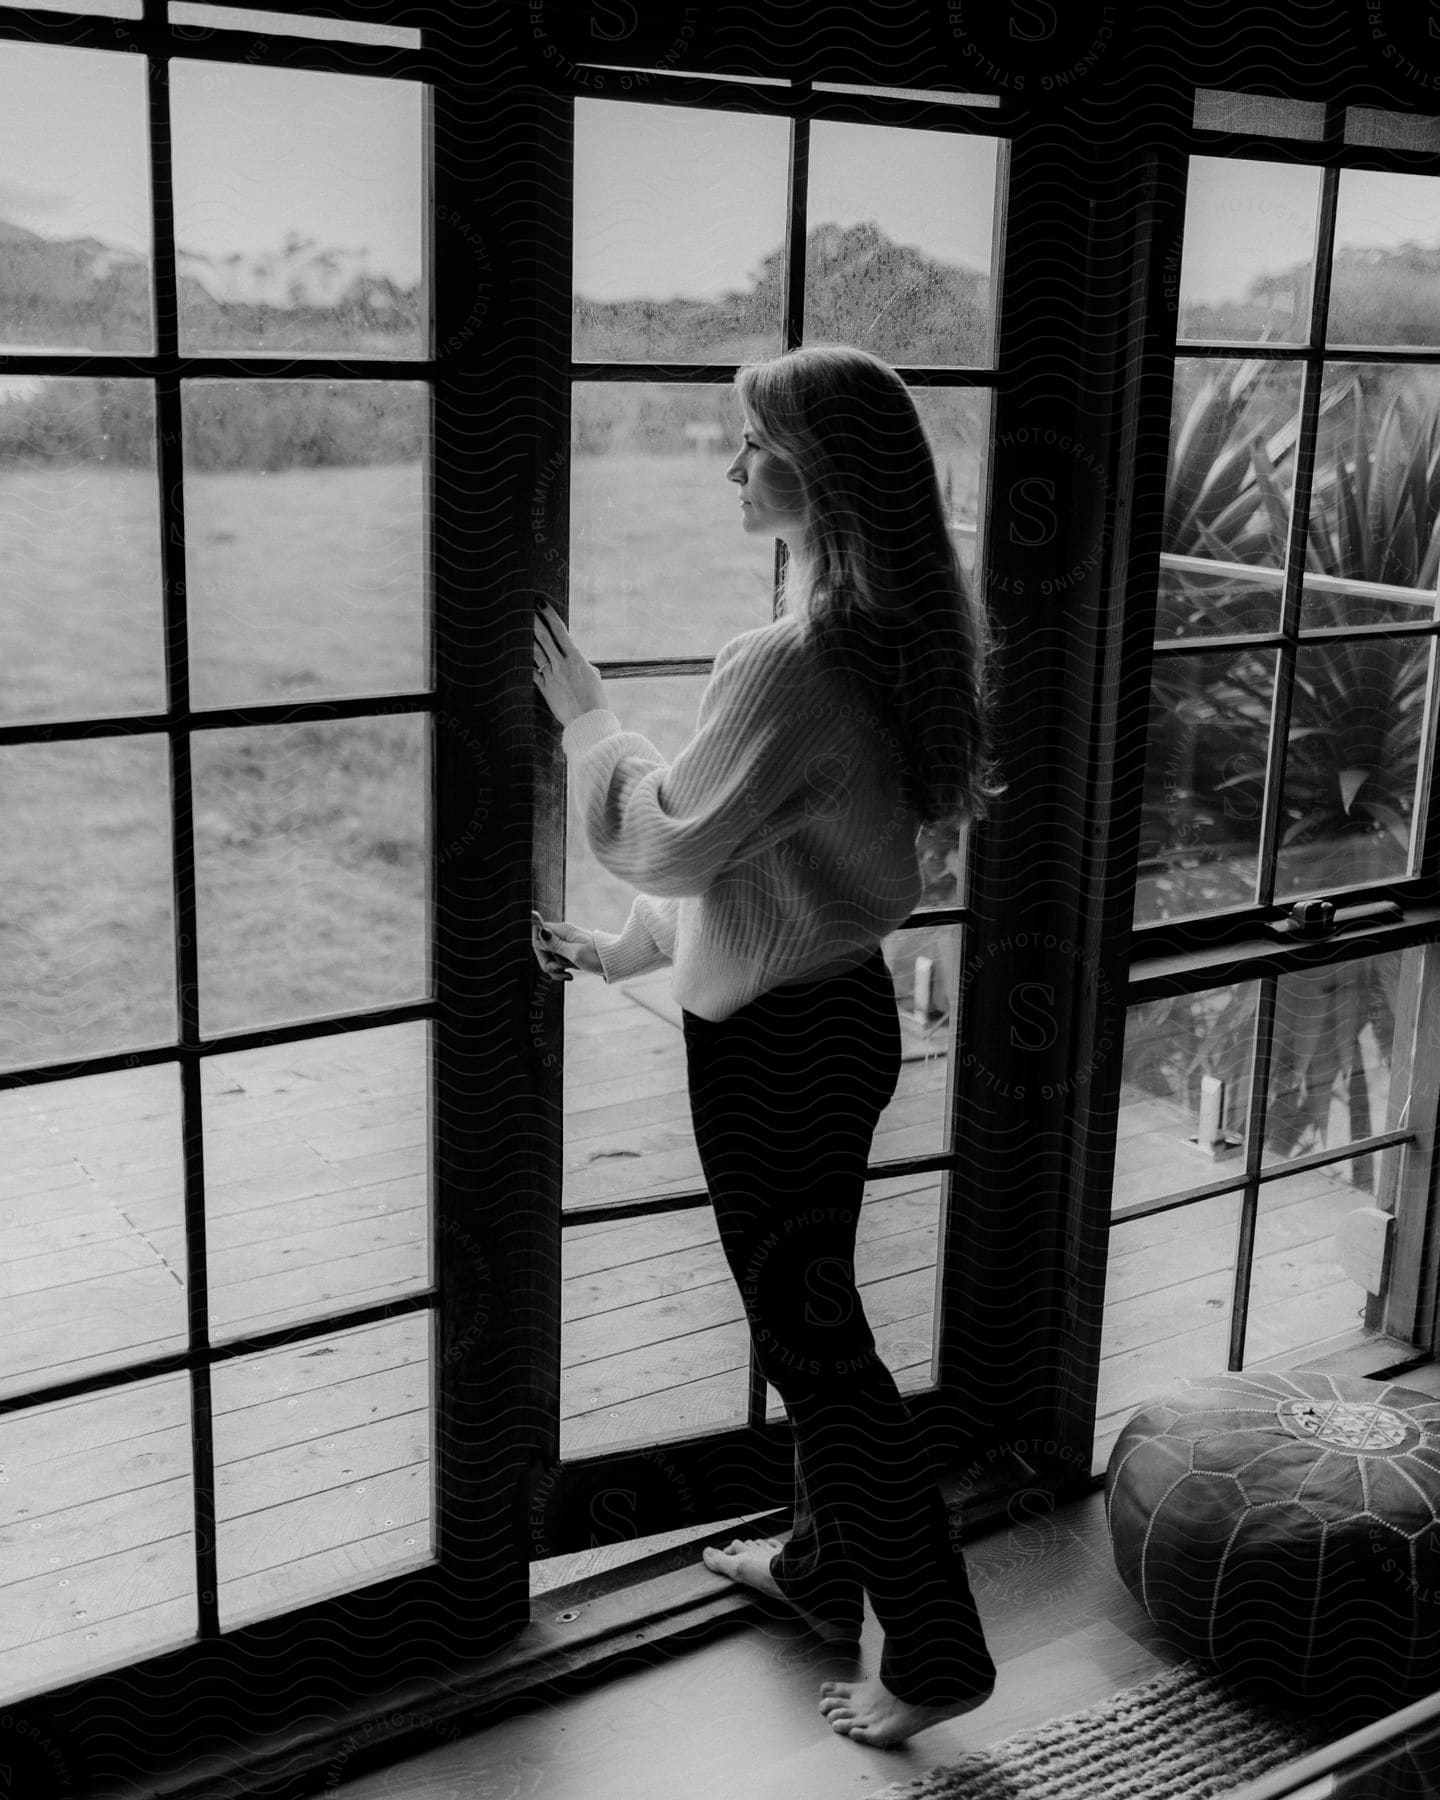 A woman opens a door with large glass windows to the backyard of a house